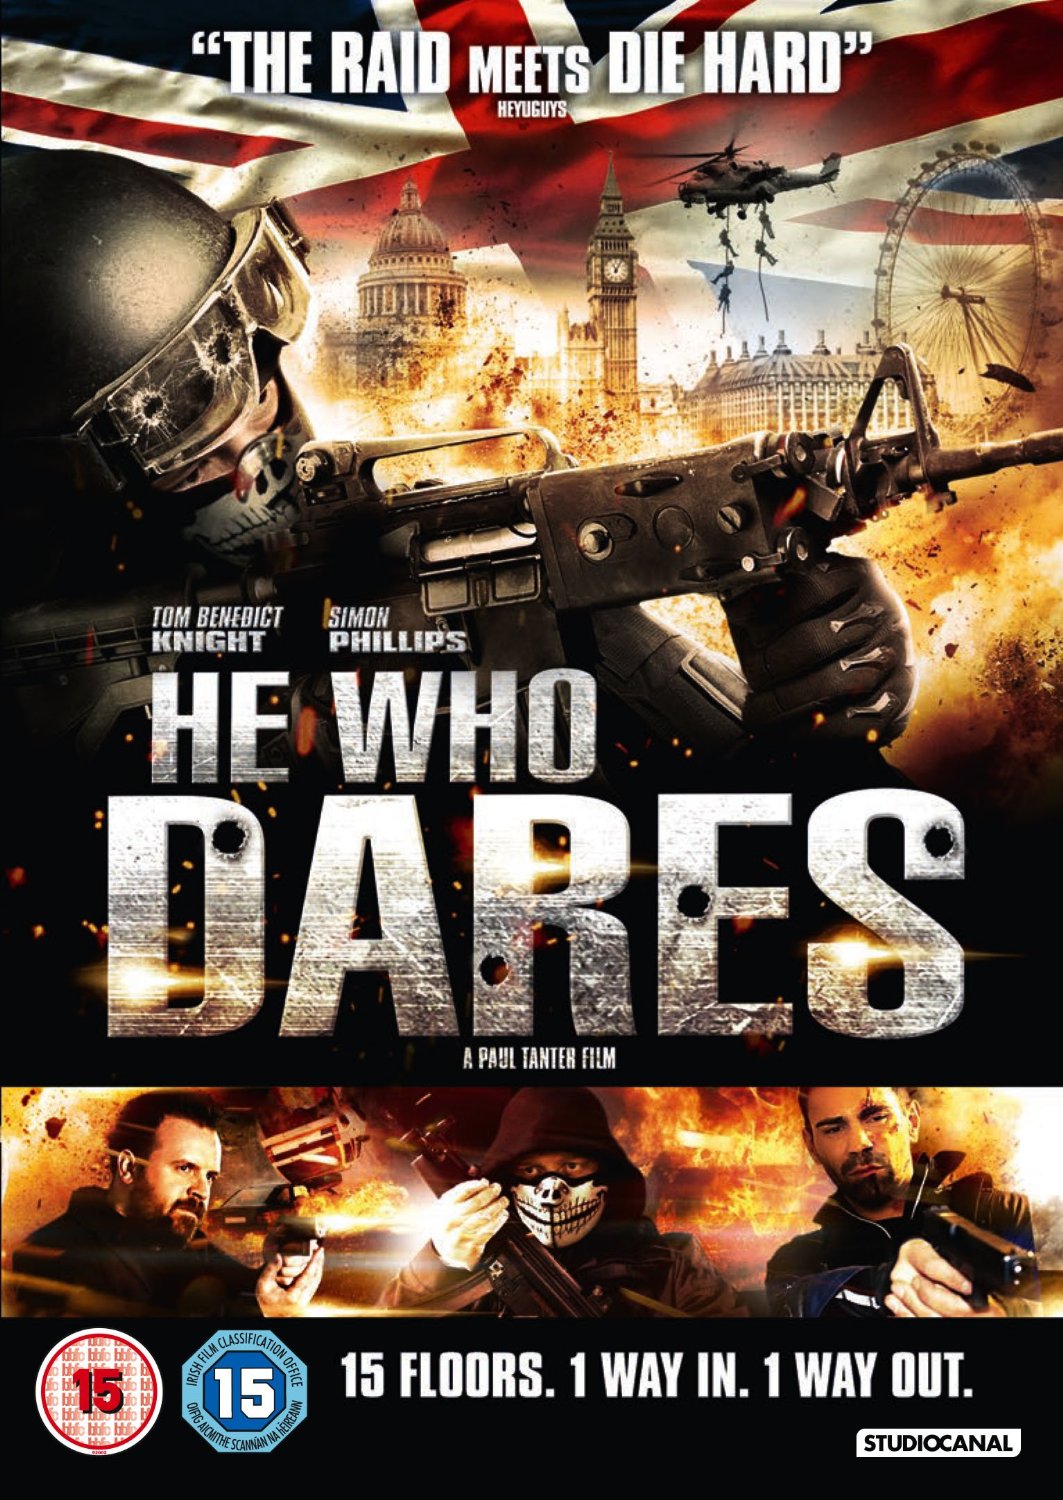 He Who Dares UK DVD cover.